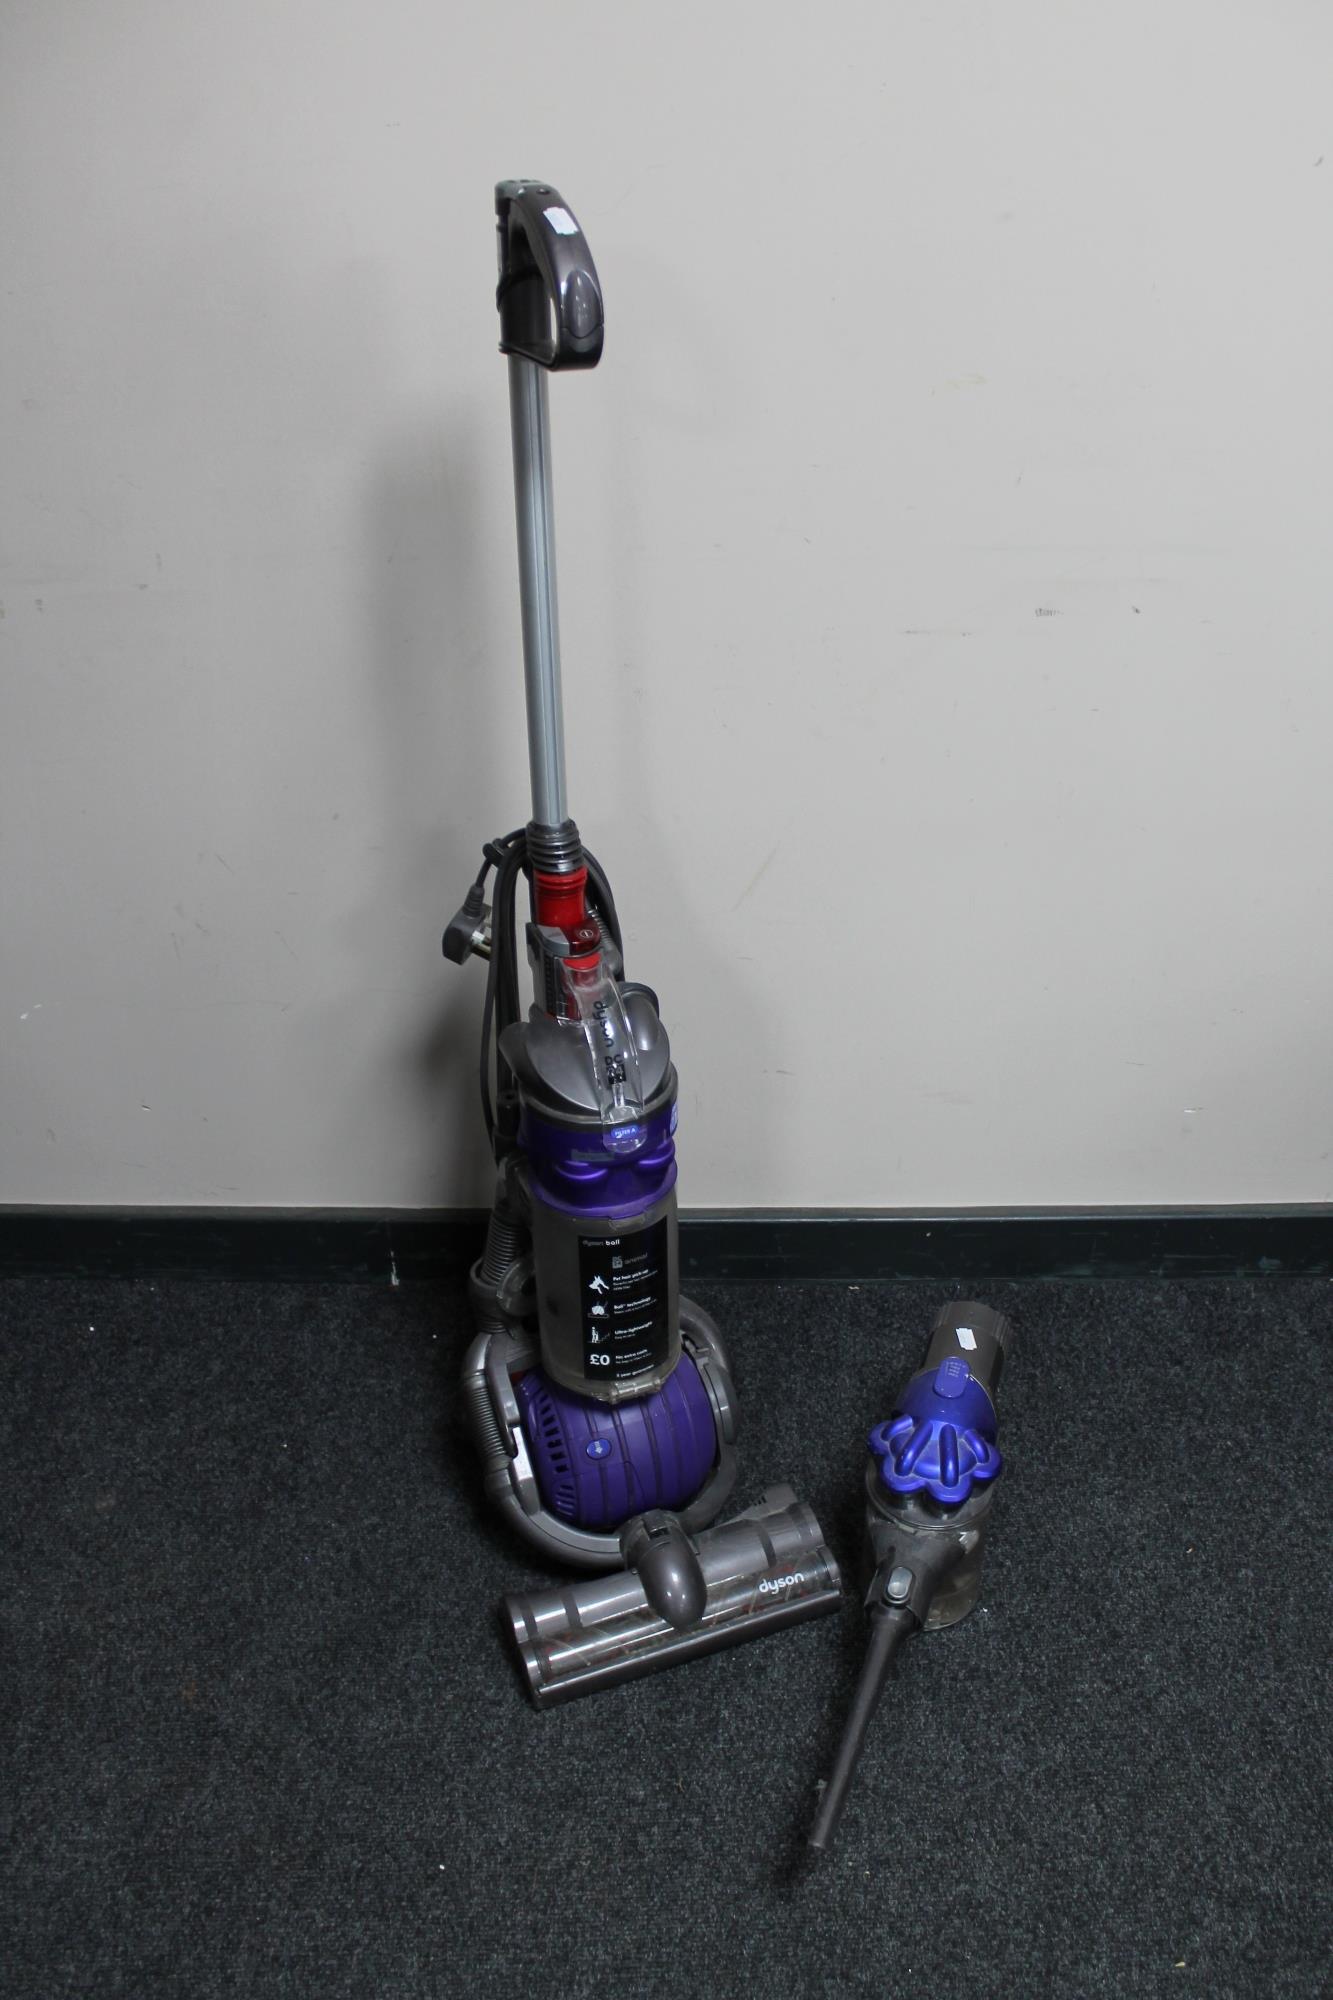 A Dyson DC 24 upright ball vacuum cleaner and a Dyson hand held vacuum (no charger)